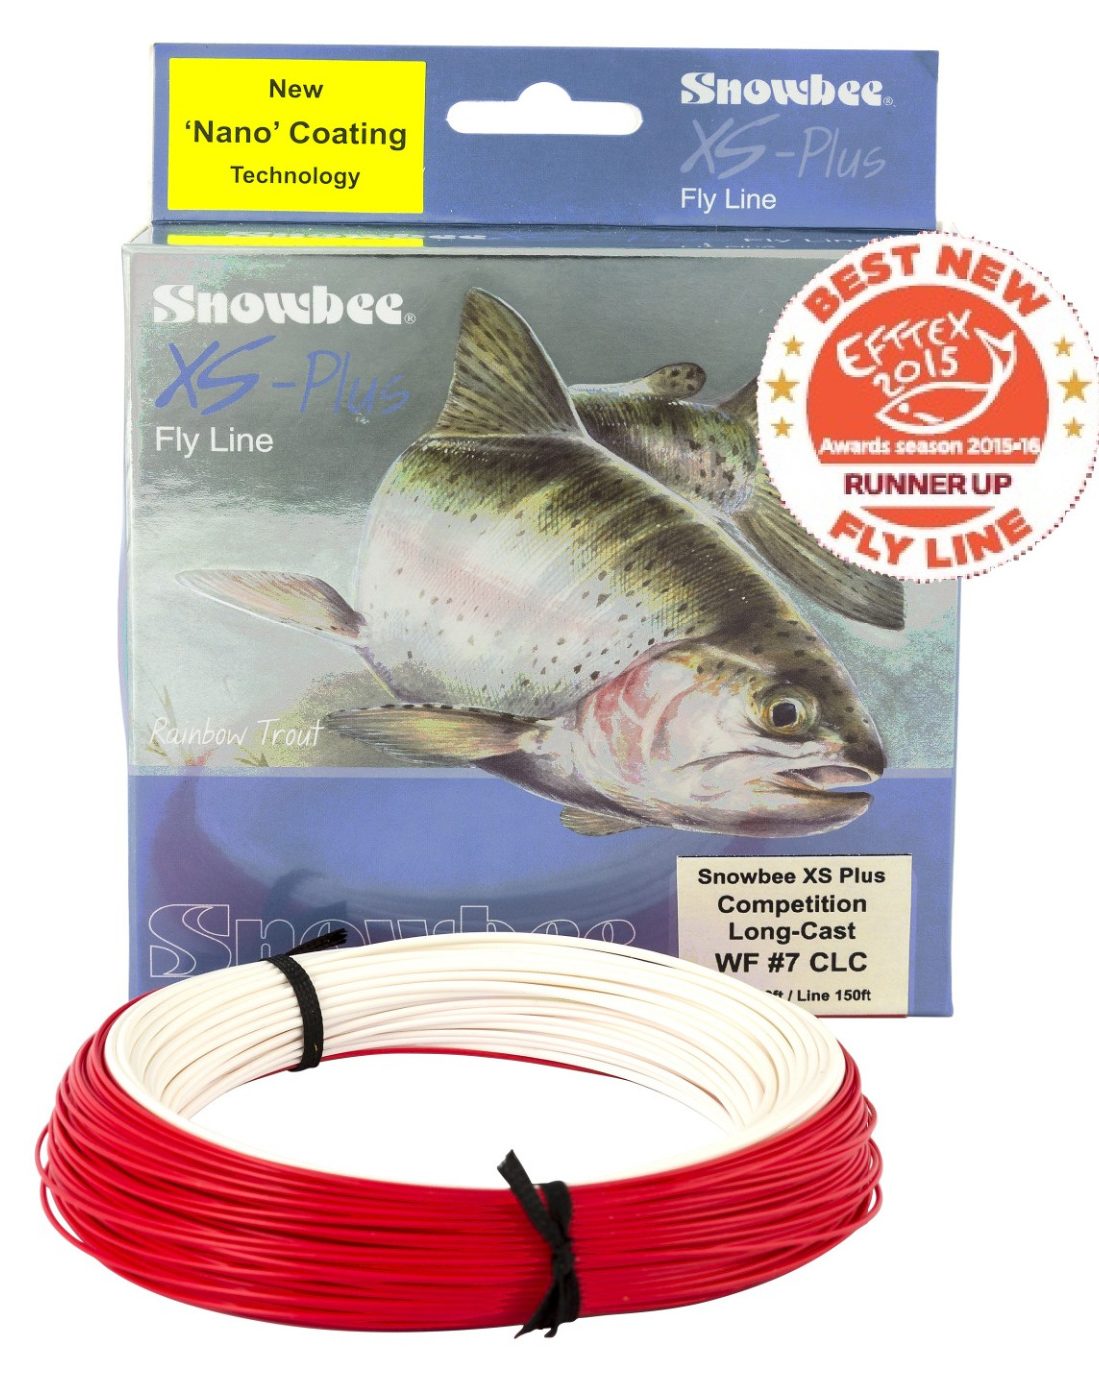 Long cast Competition fly lines…